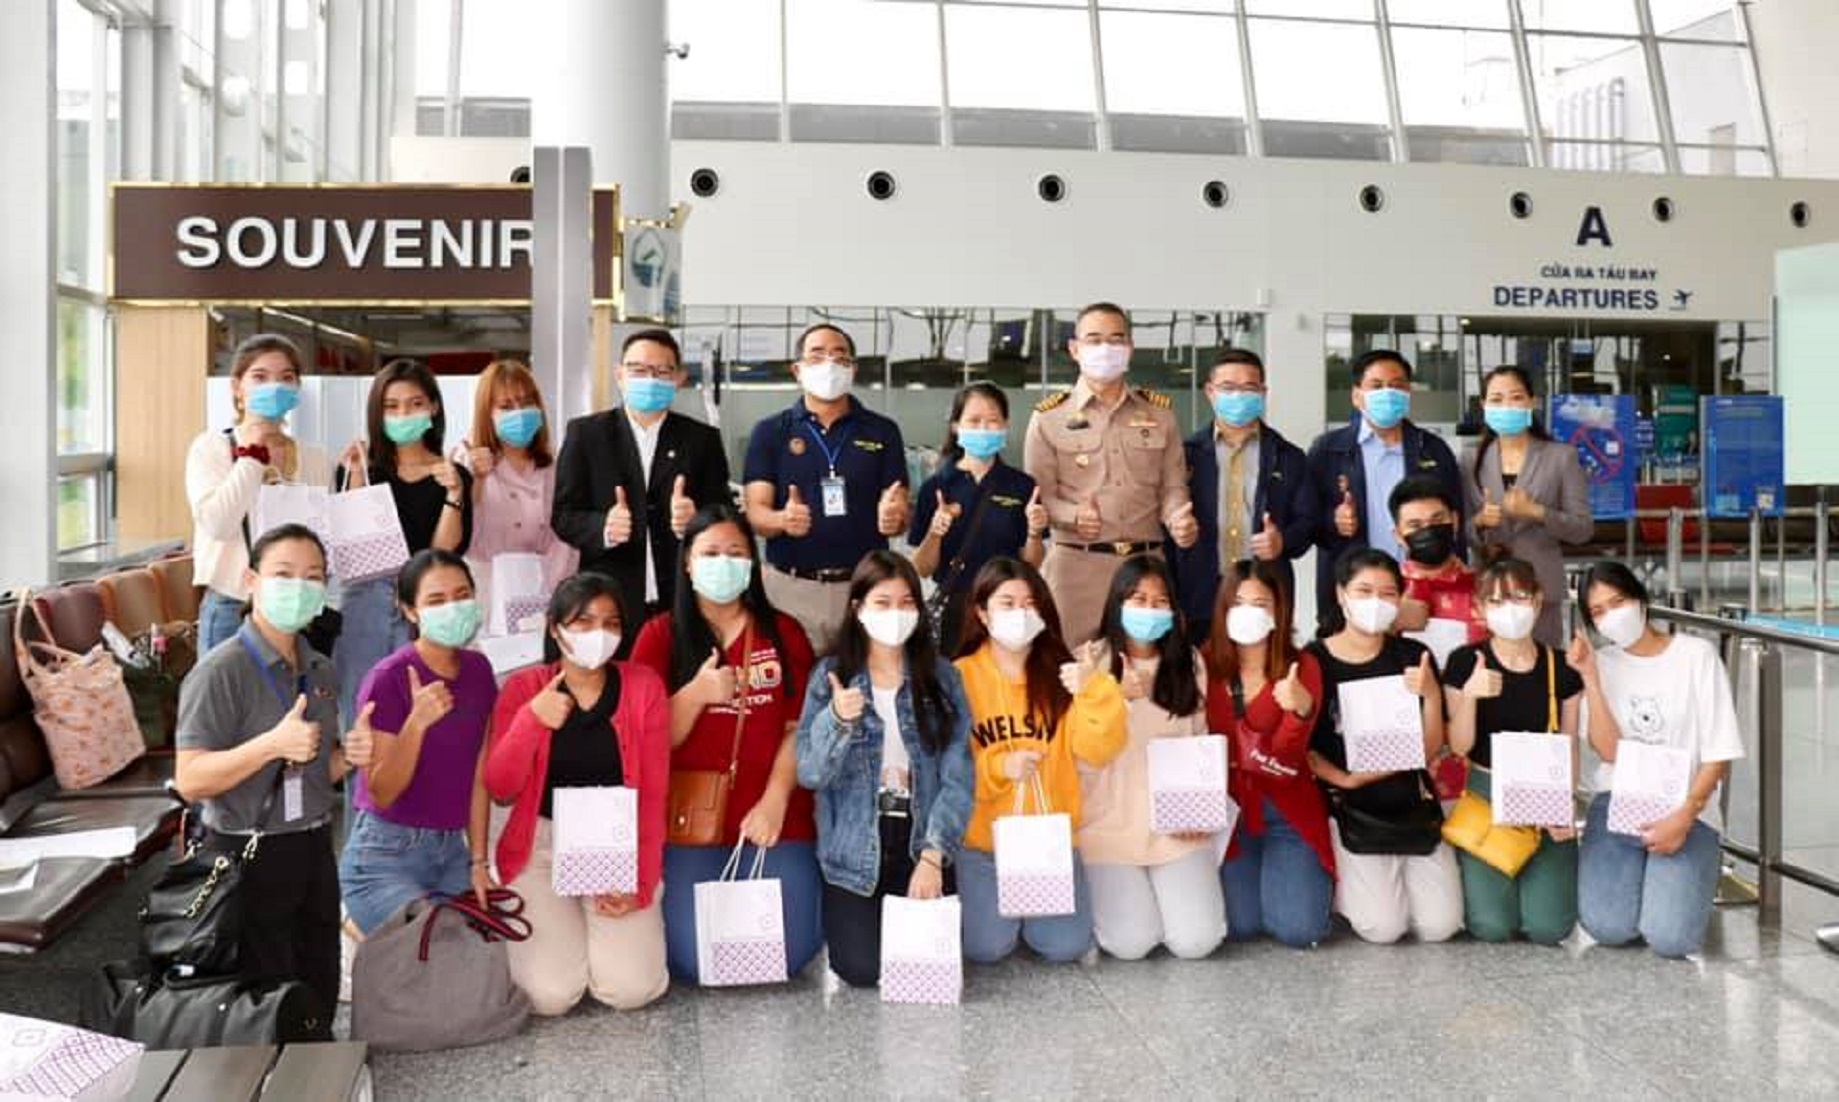 Thailand To Resume Repatriating Stranded Thais Overseas After Student Dies From COVID-19 In Egypt